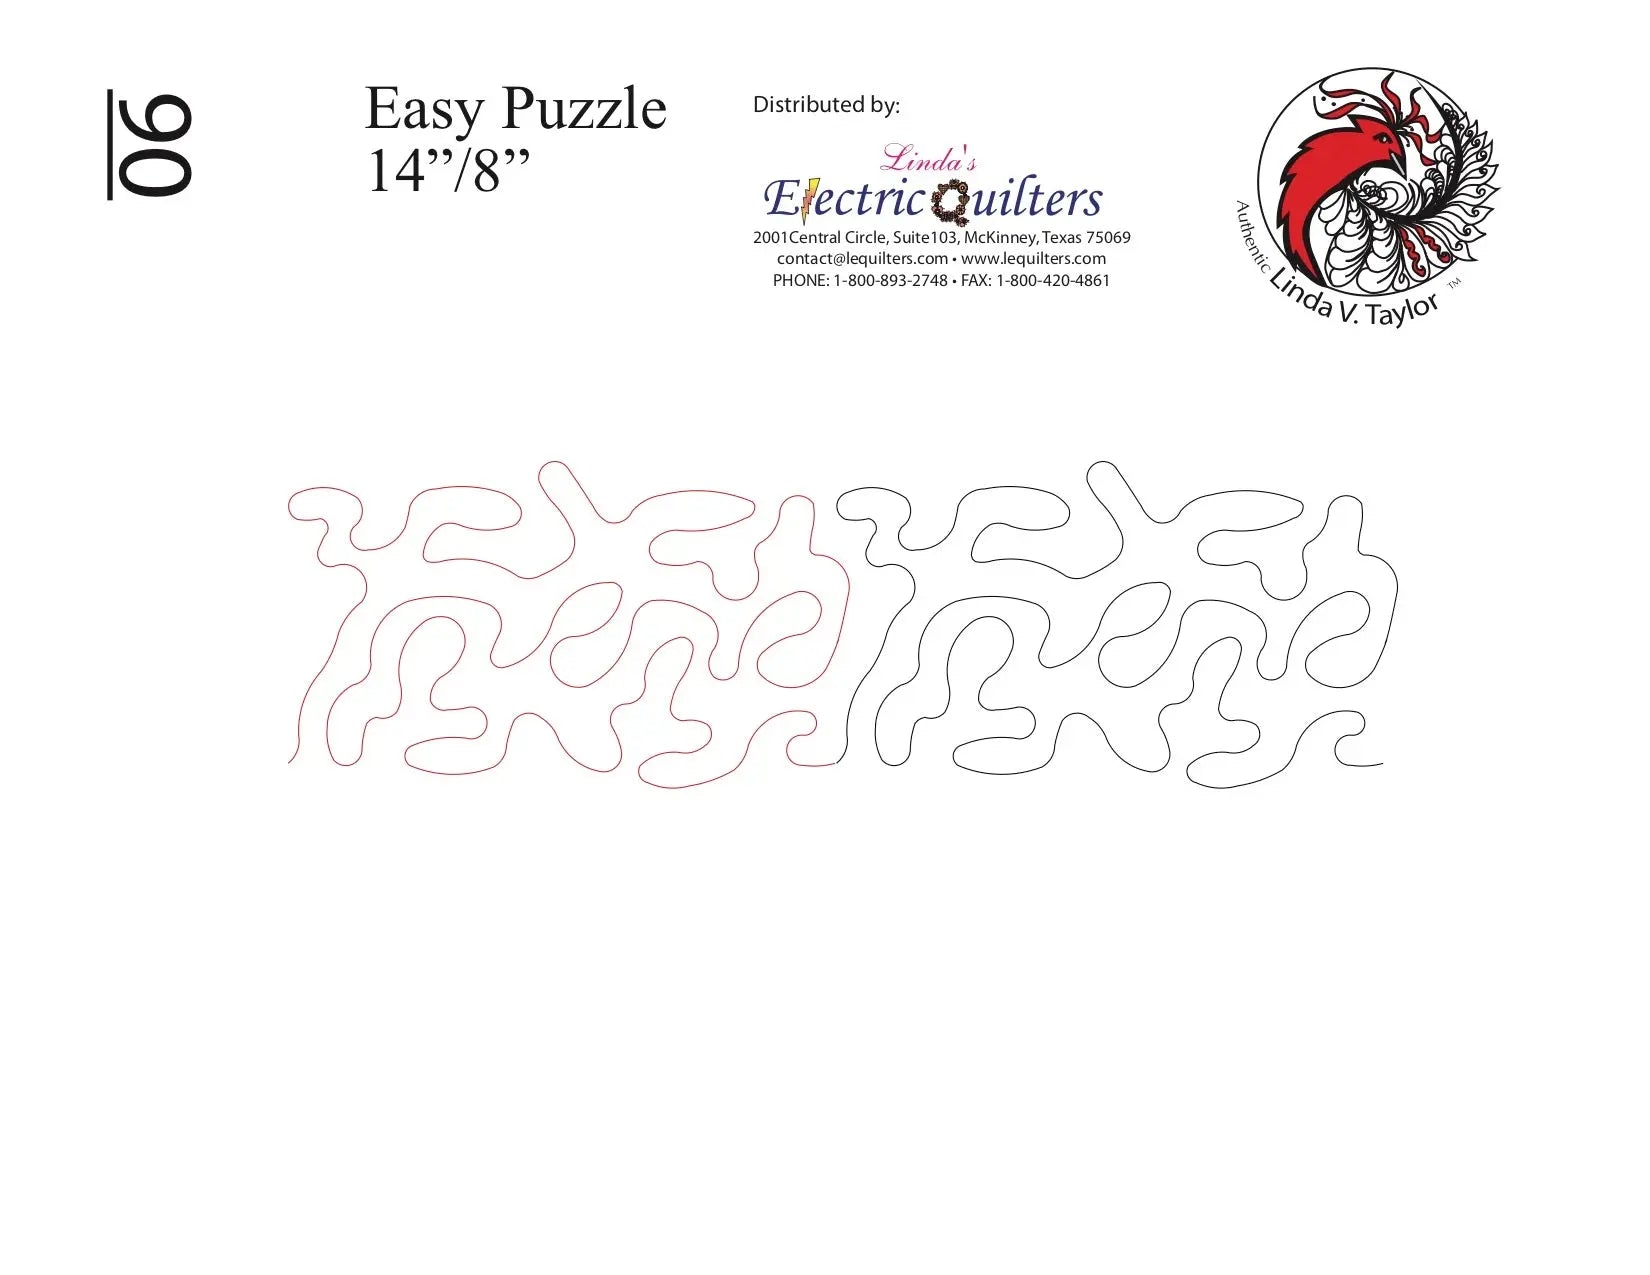 090 Easy Puzzle Pantograph by Linda V. Taylor